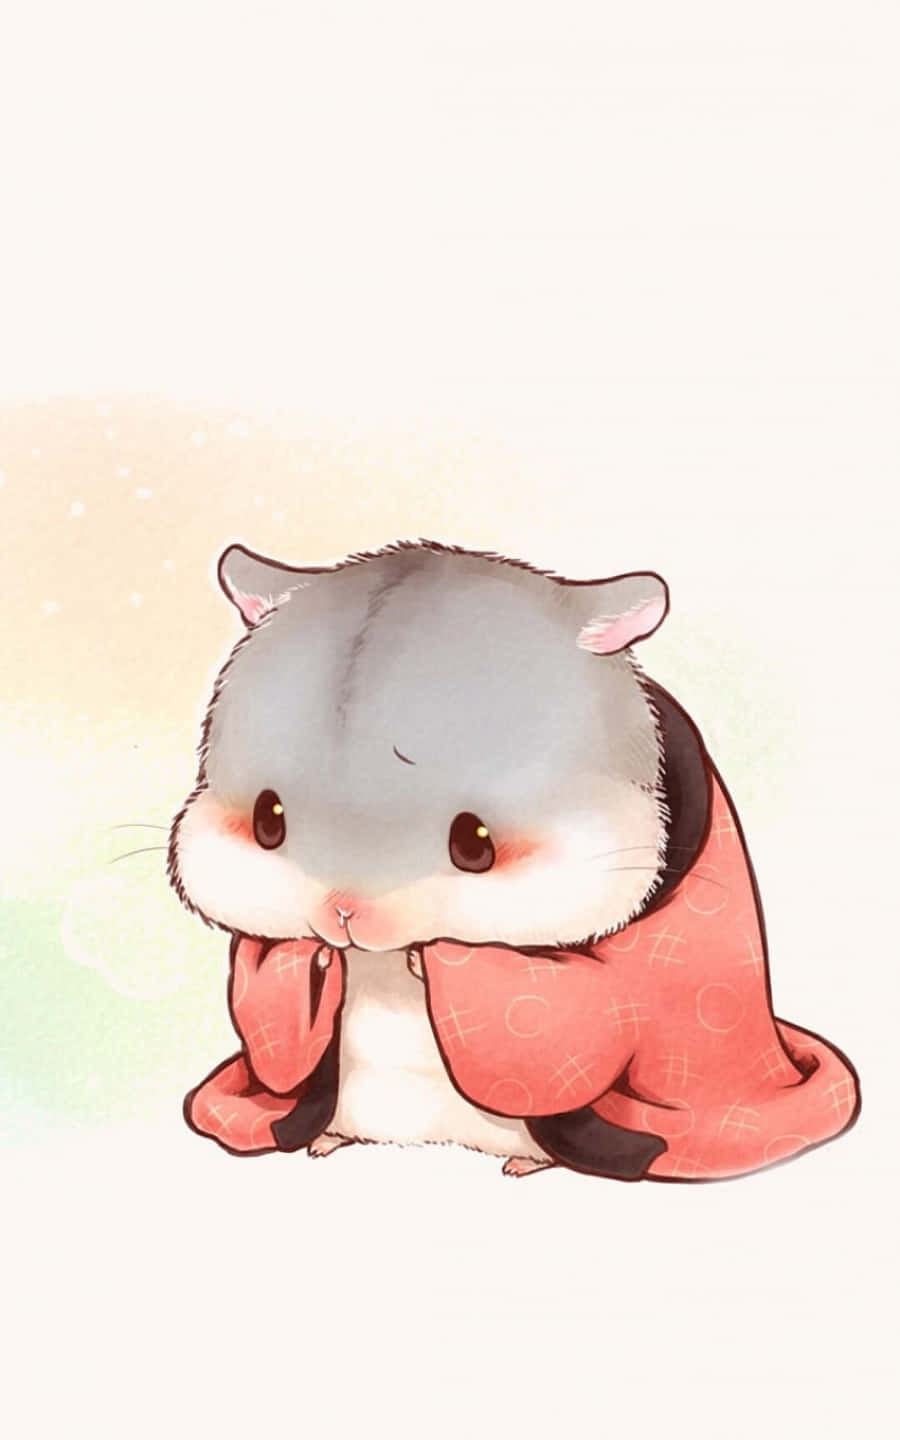 Download Cute Chibis Hamster Drawing Picture | Wallpapers.com